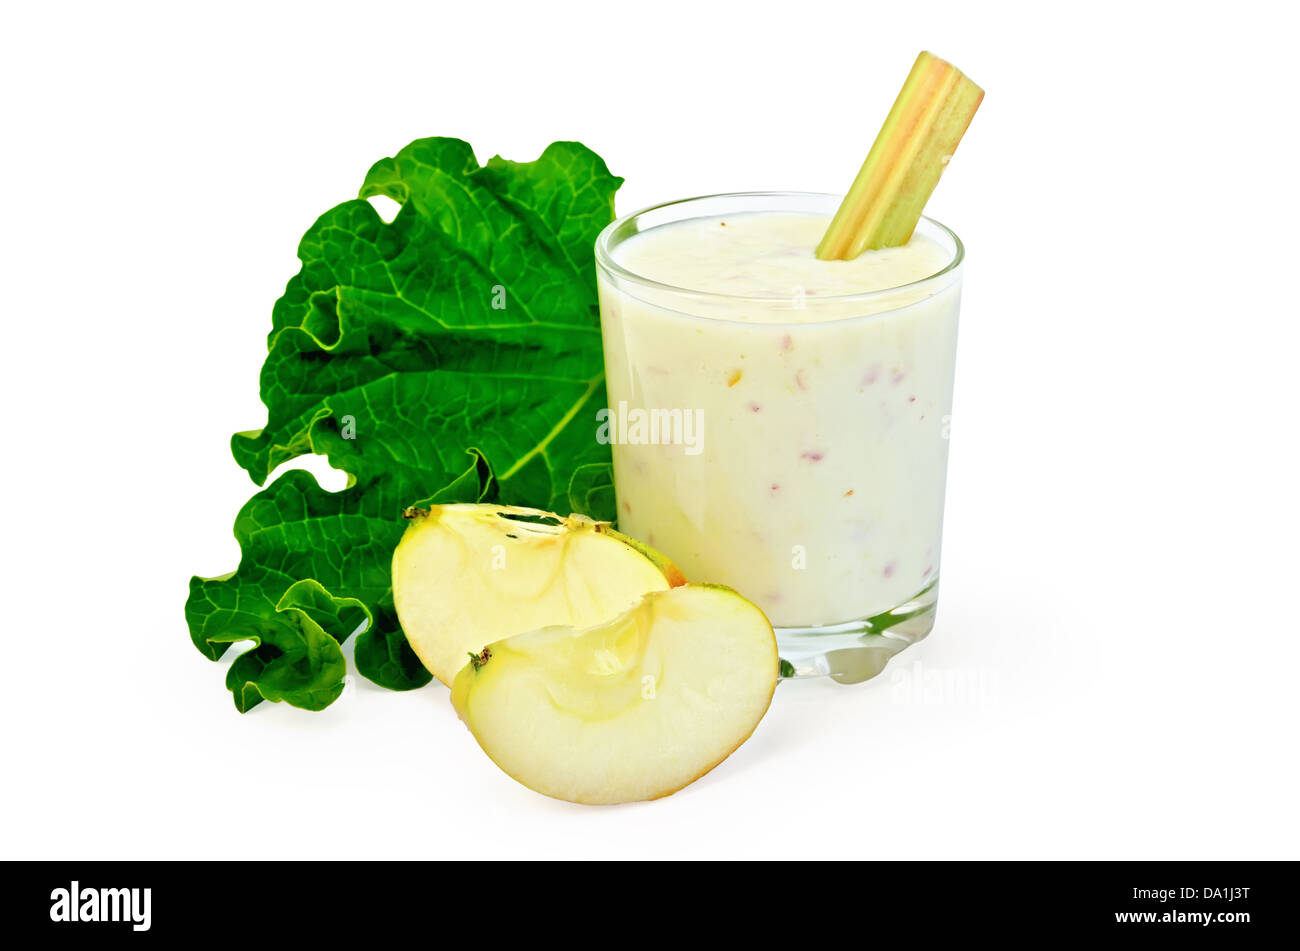 Dairy cocktail in a glass with leaves and rhubarb stalks, slices of apple isolated on a white background Stock Photo